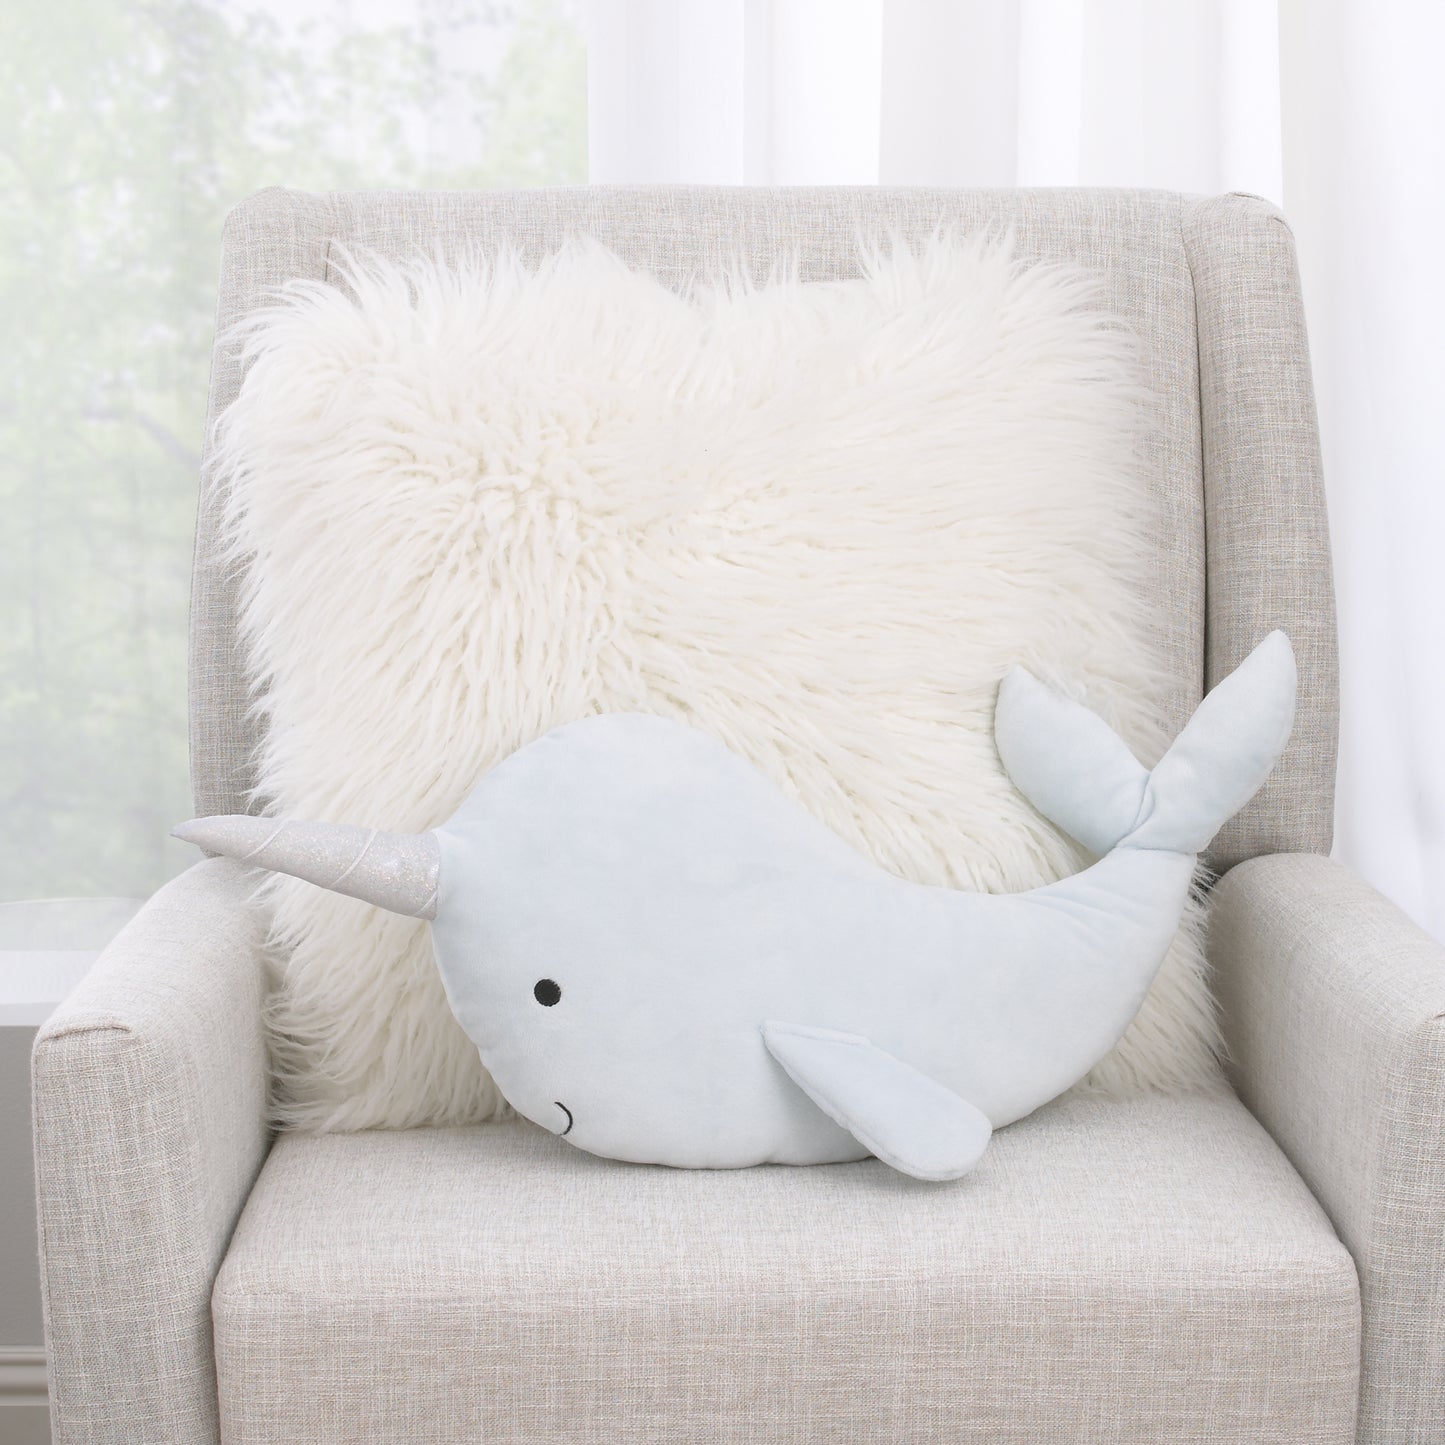 Little Love by NoJo Light Blue Whimsical Narwhal Shaped Decorative Pillow with 3D Silver Metallic Horn